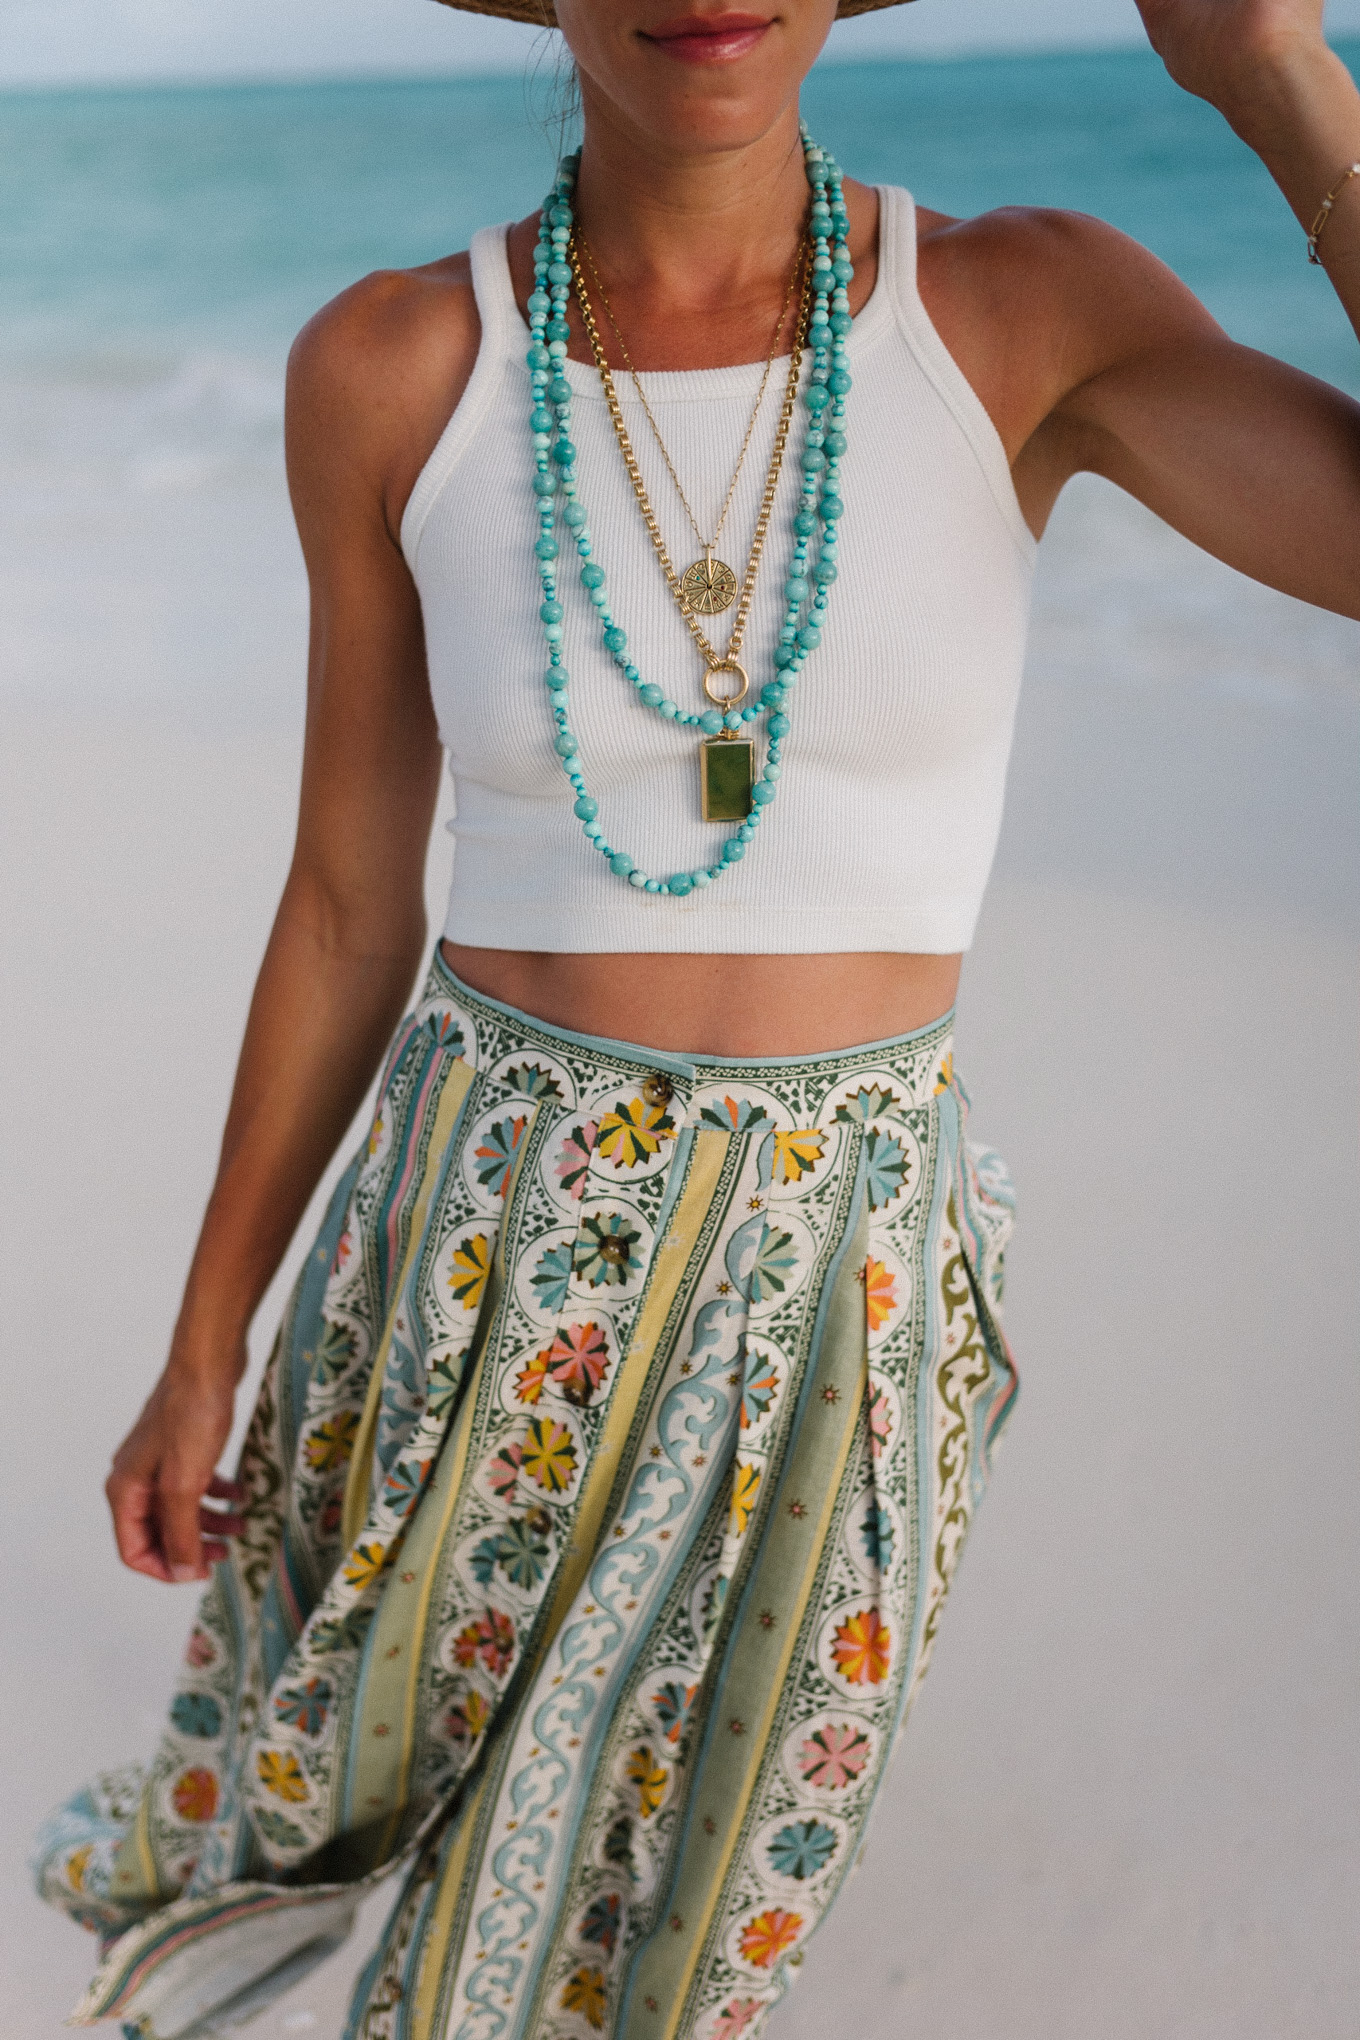 Floral skirt, white tank top, turquoise jewelry